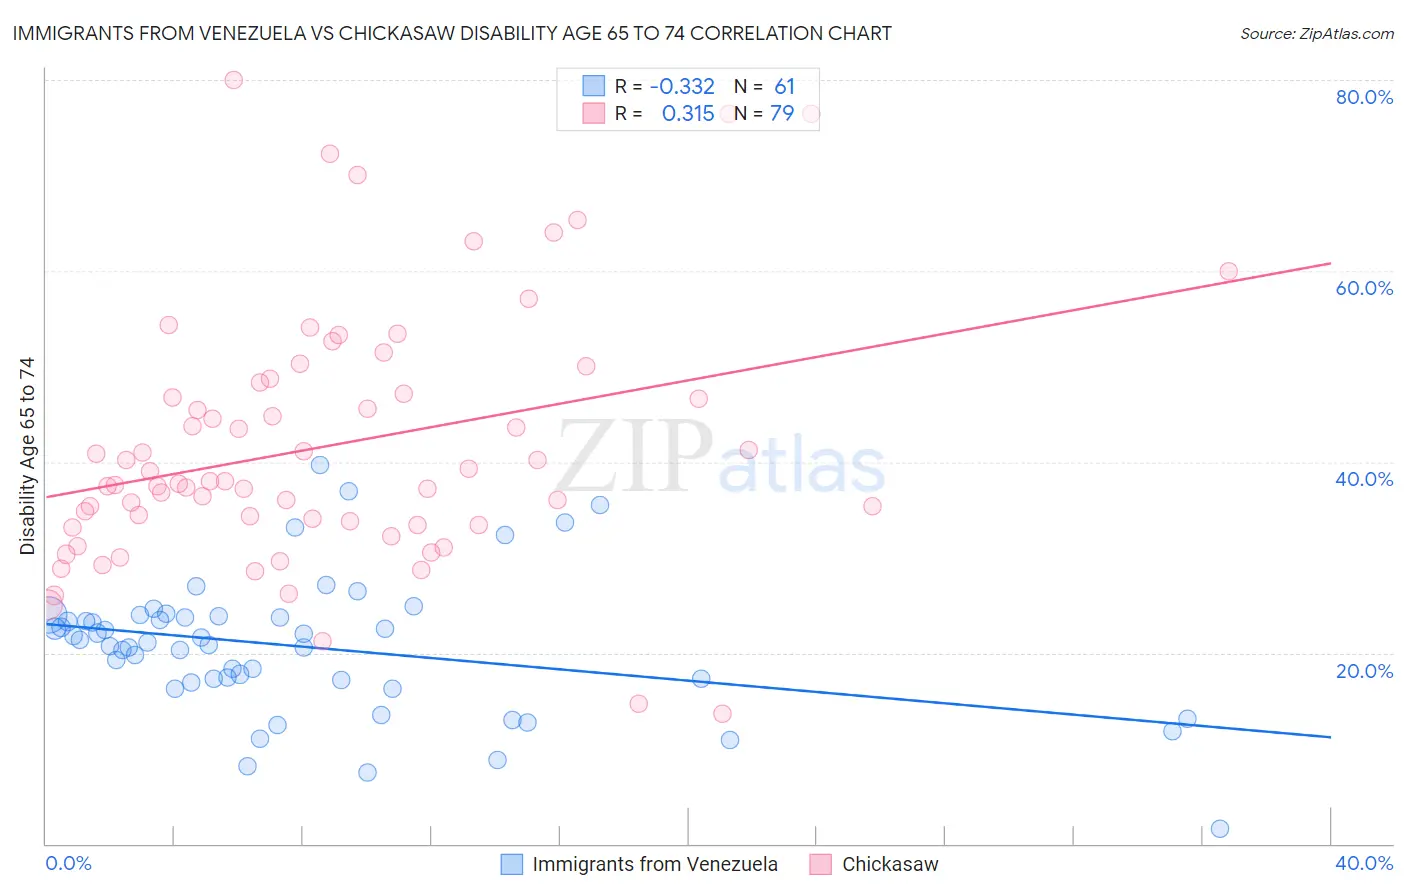 Immigrants from Venezuela vs Chickasaw Disability Age 65 to 74